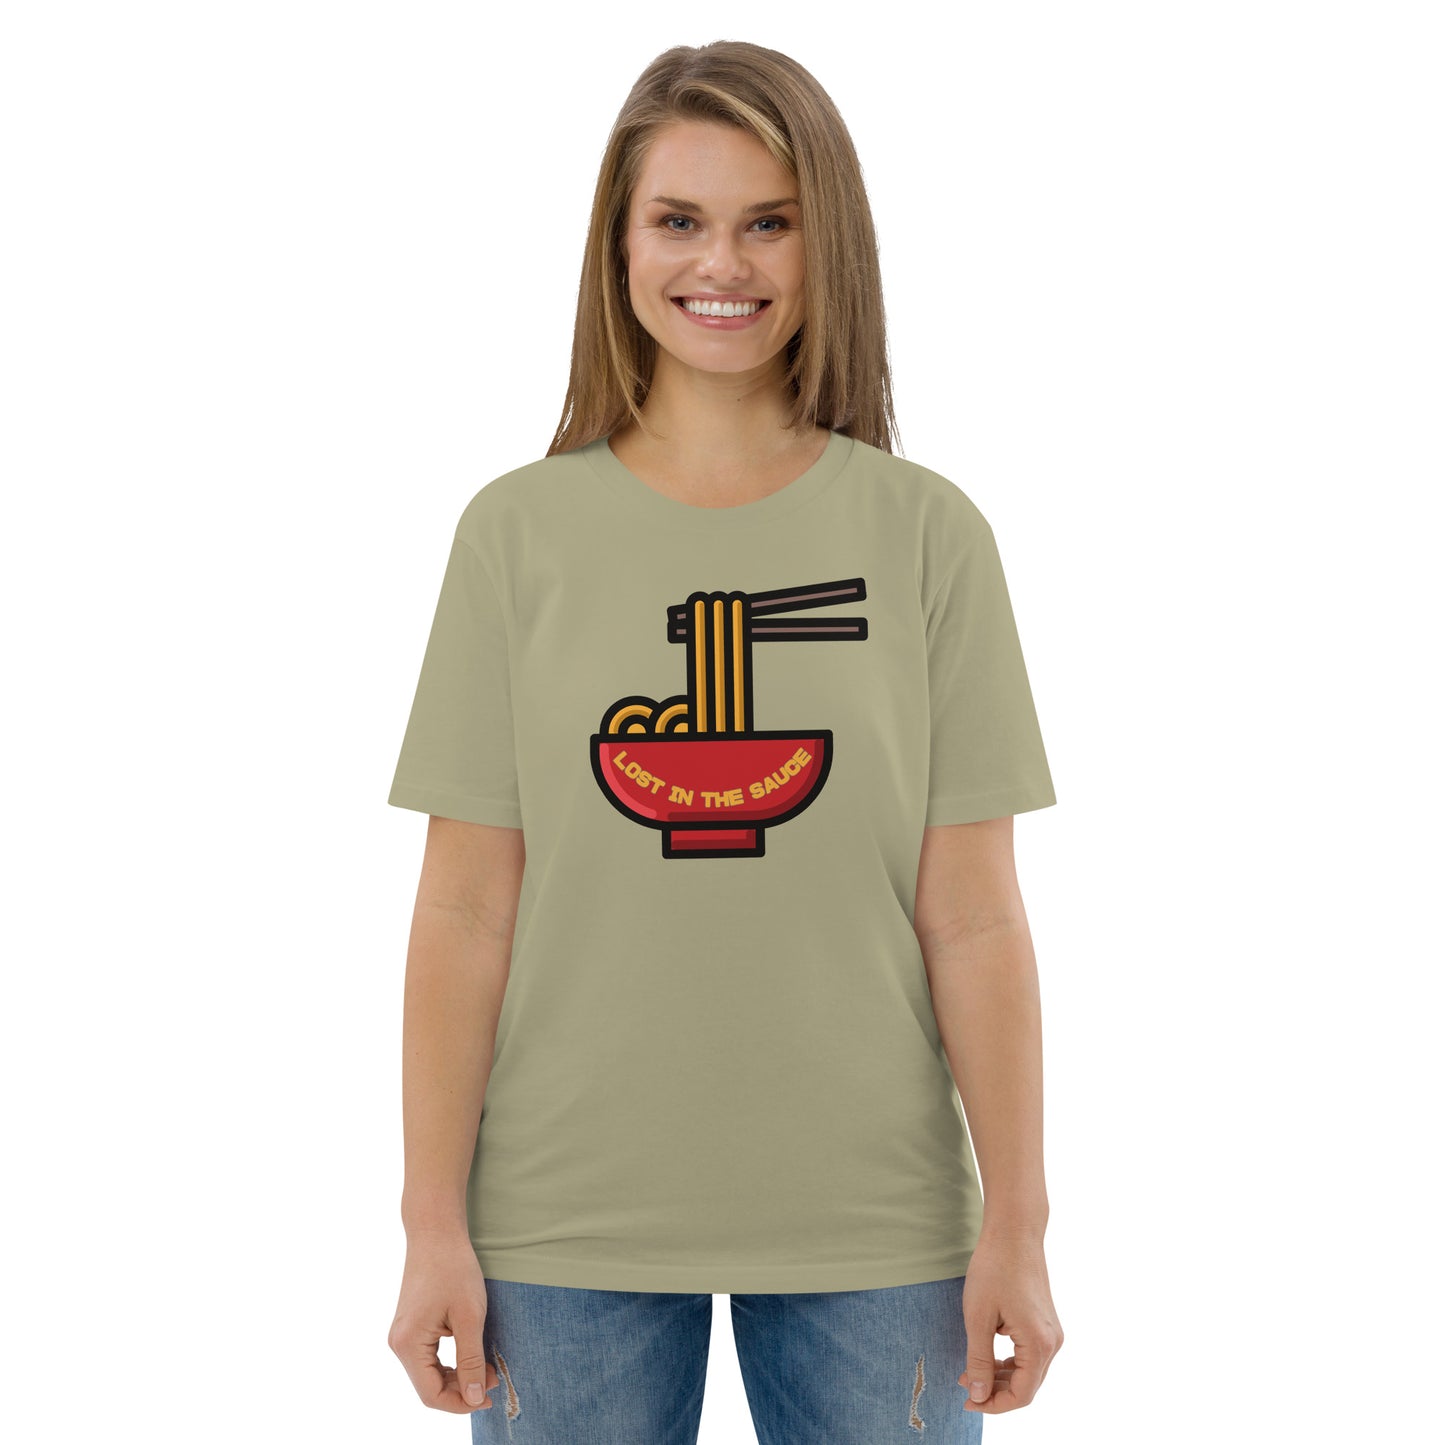 LOST IN THE SAUCE (ASIAN NOODLE) Women's Organic Cotton T-Shirt